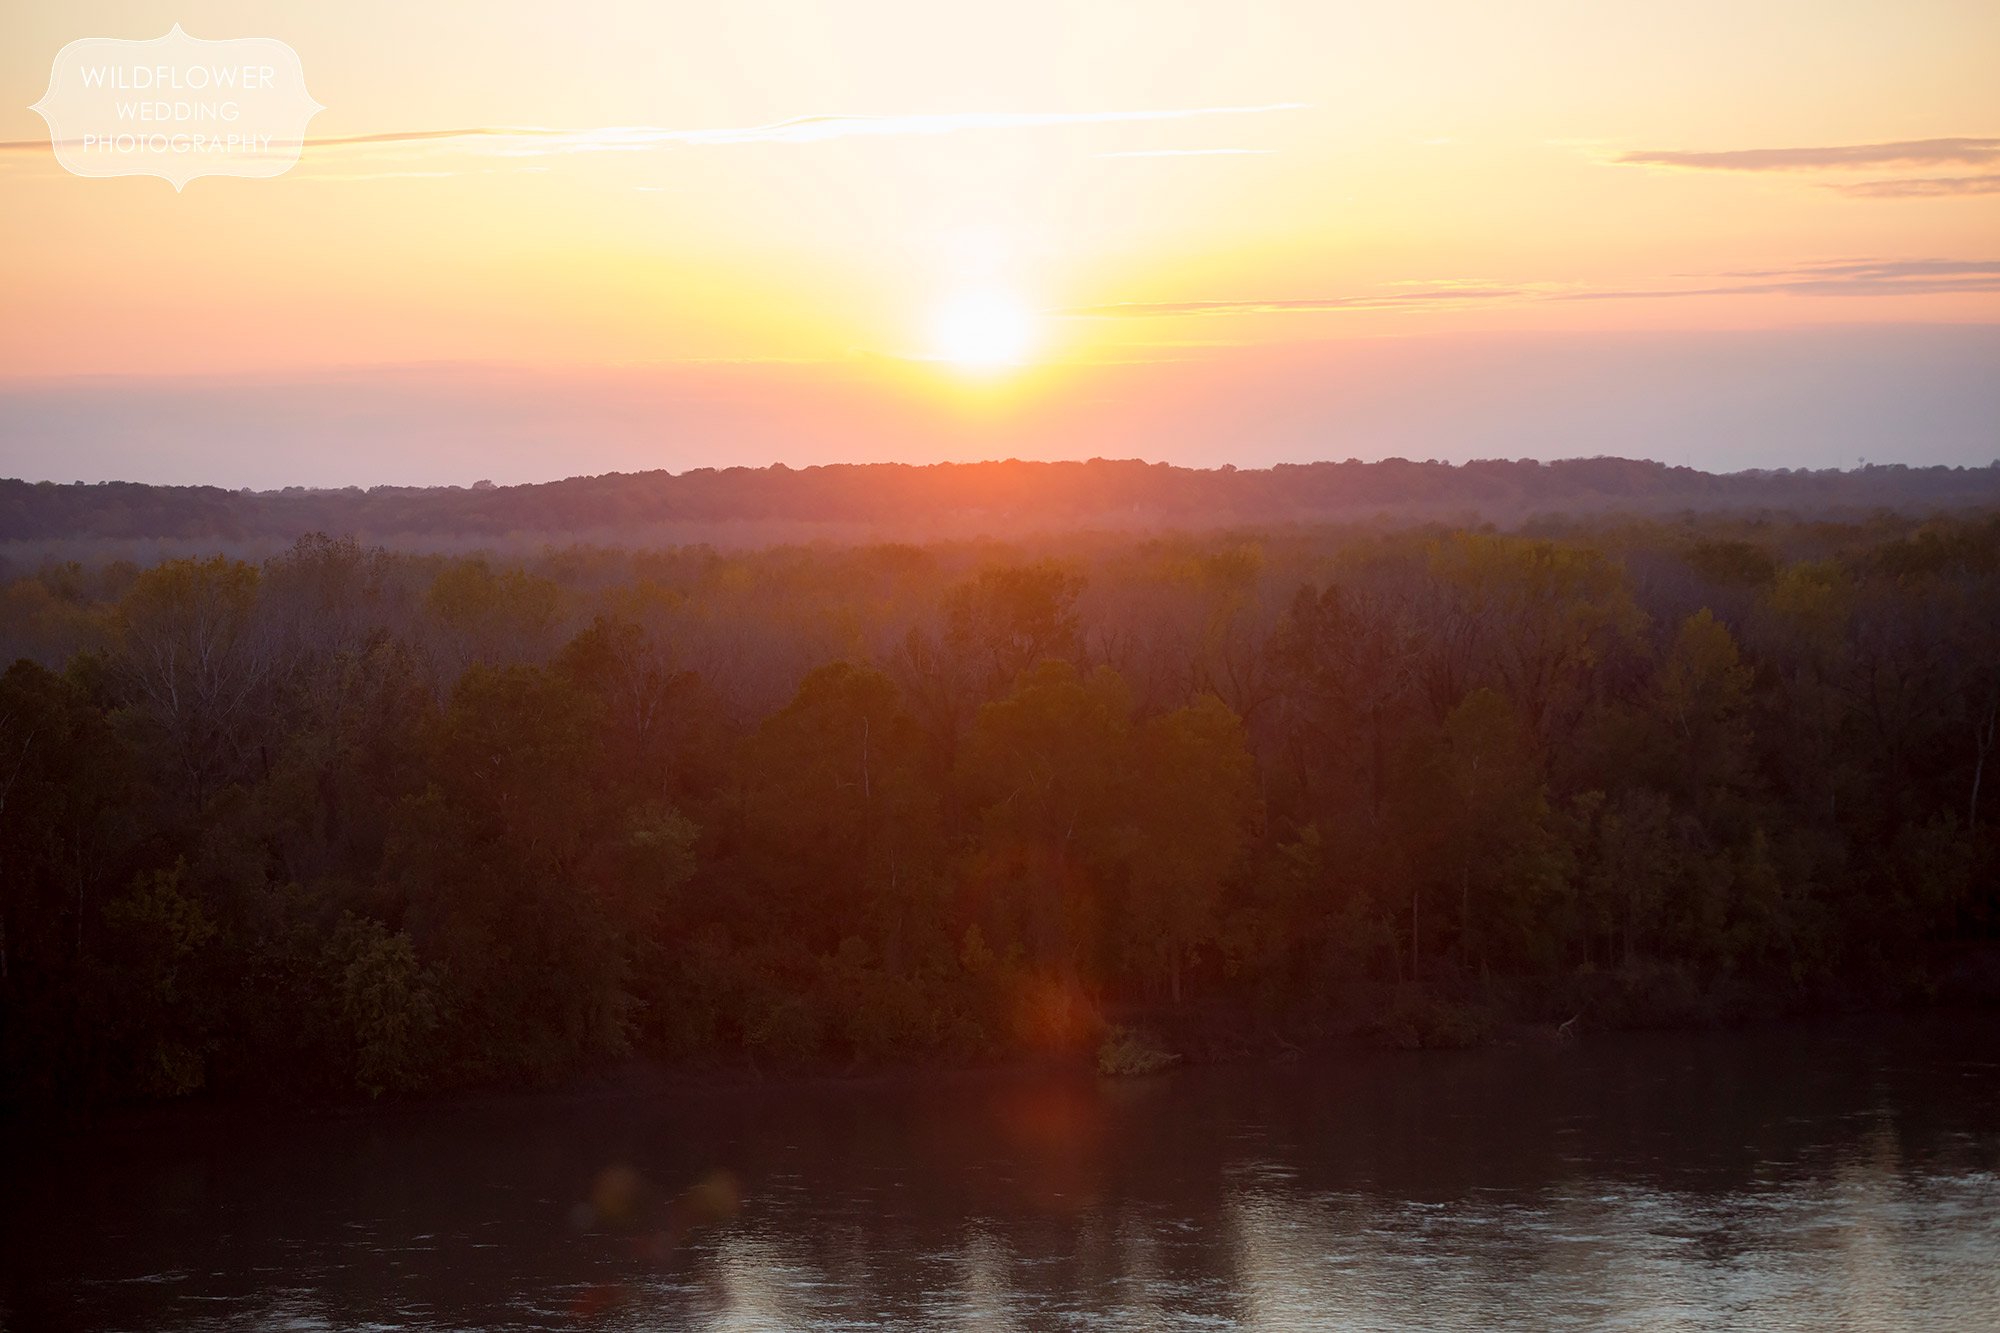 The sun sets over the Missouri River after a blufftop wedding ceremony at Les Bourgeois.